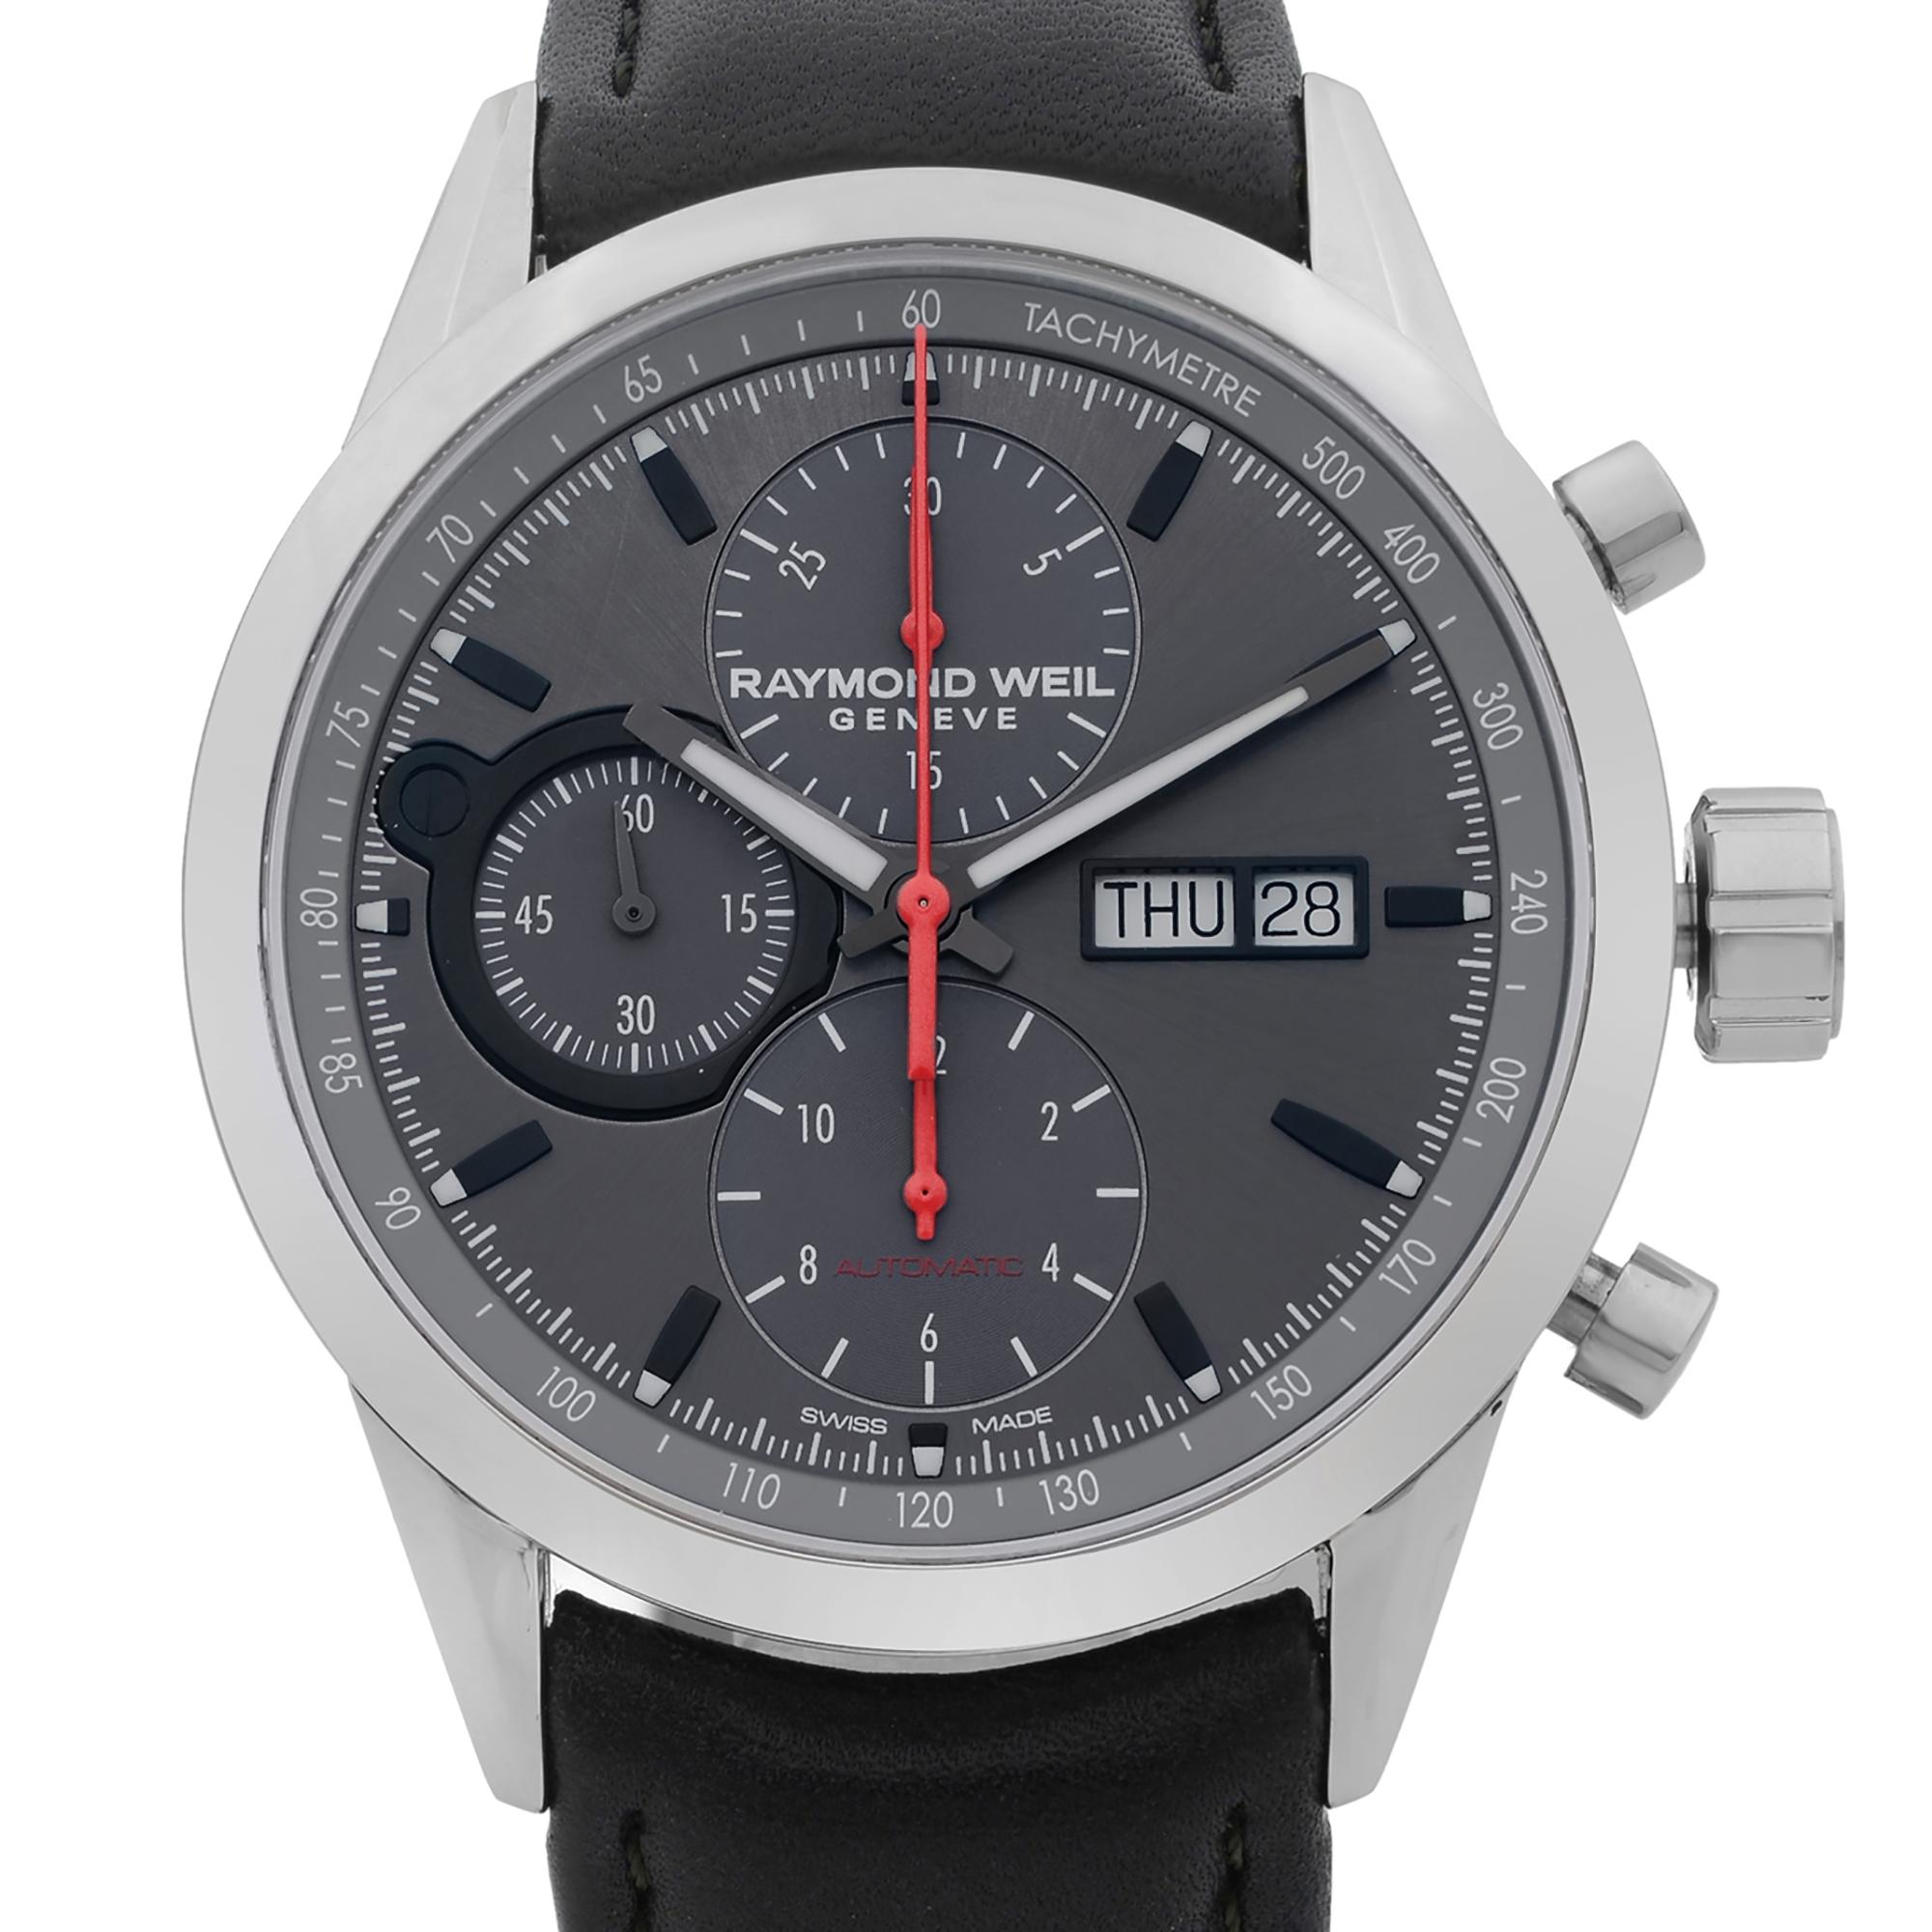 Display Model Raymond Weil Freelancer Steel Grey Dial Automatic Men's Watch. This Beautiful Timepiece Features: Stainless Steel Case with a Black Leather Strap, Fixed Stainless Steel Bezel, Gray Dial with Luminous Gray Hands, And Index Hour Markers.